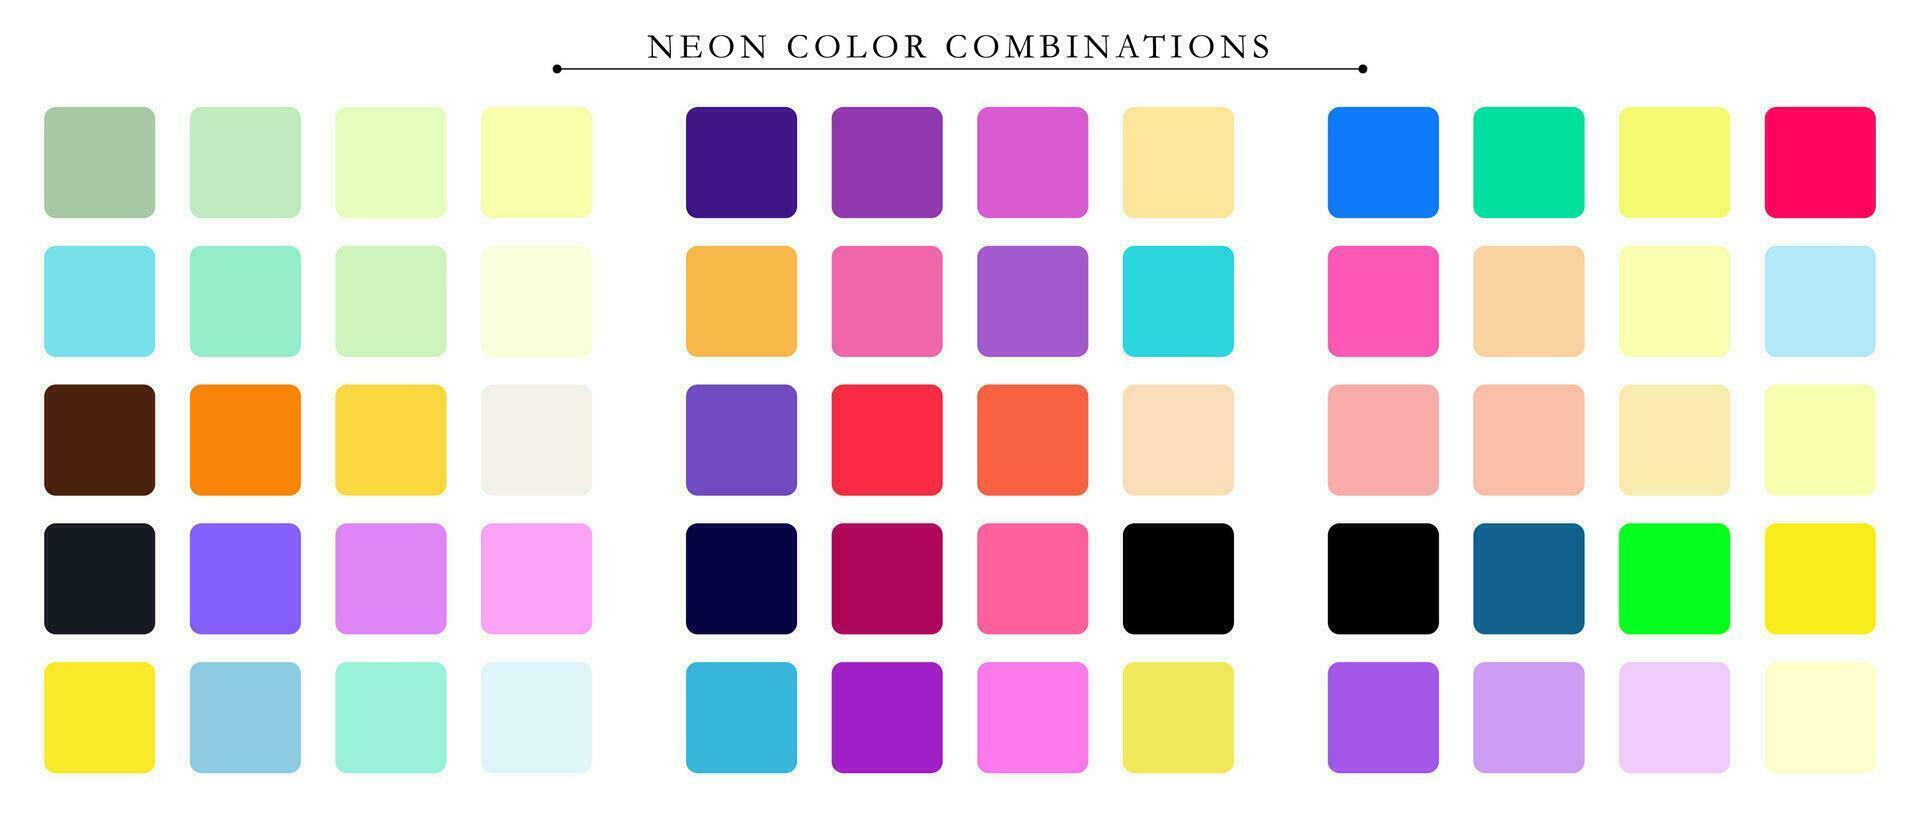 Envato on X: Year after year, neon color palettes remain a huge